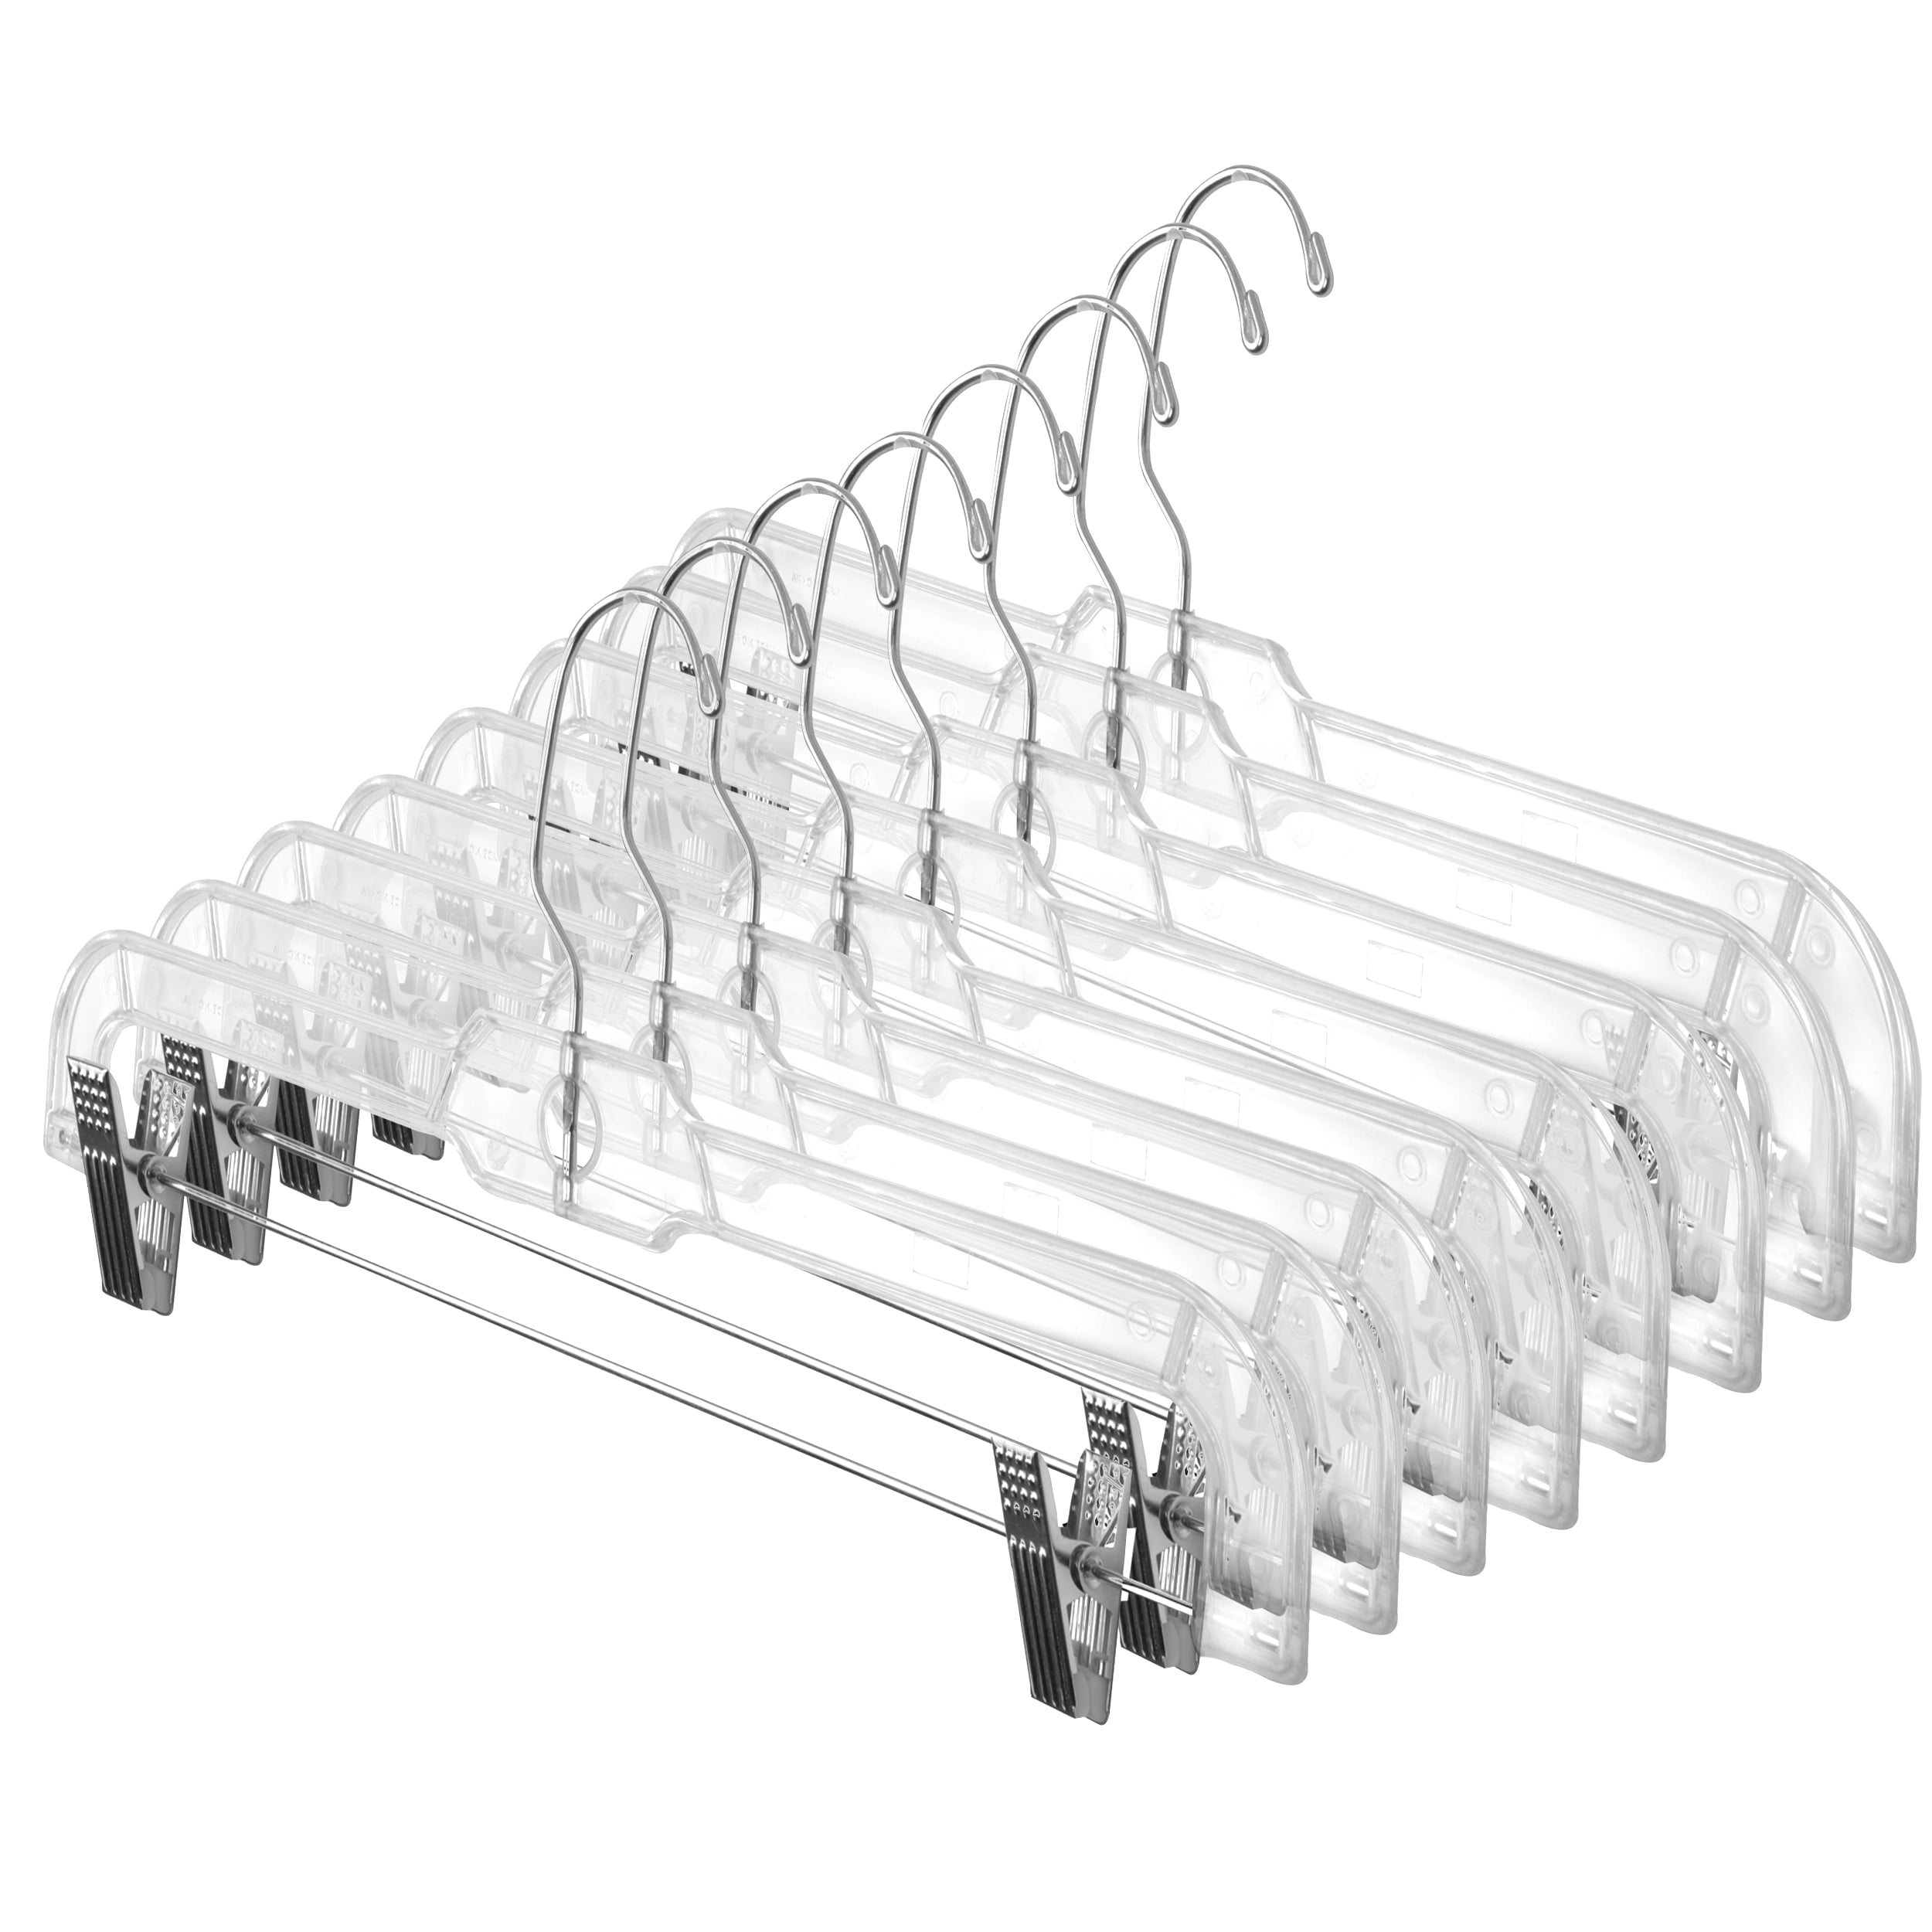 Household plastic storage pants rack-20 Clothes XXBFDT Durable Pants Hangers for Trousers Skirts 